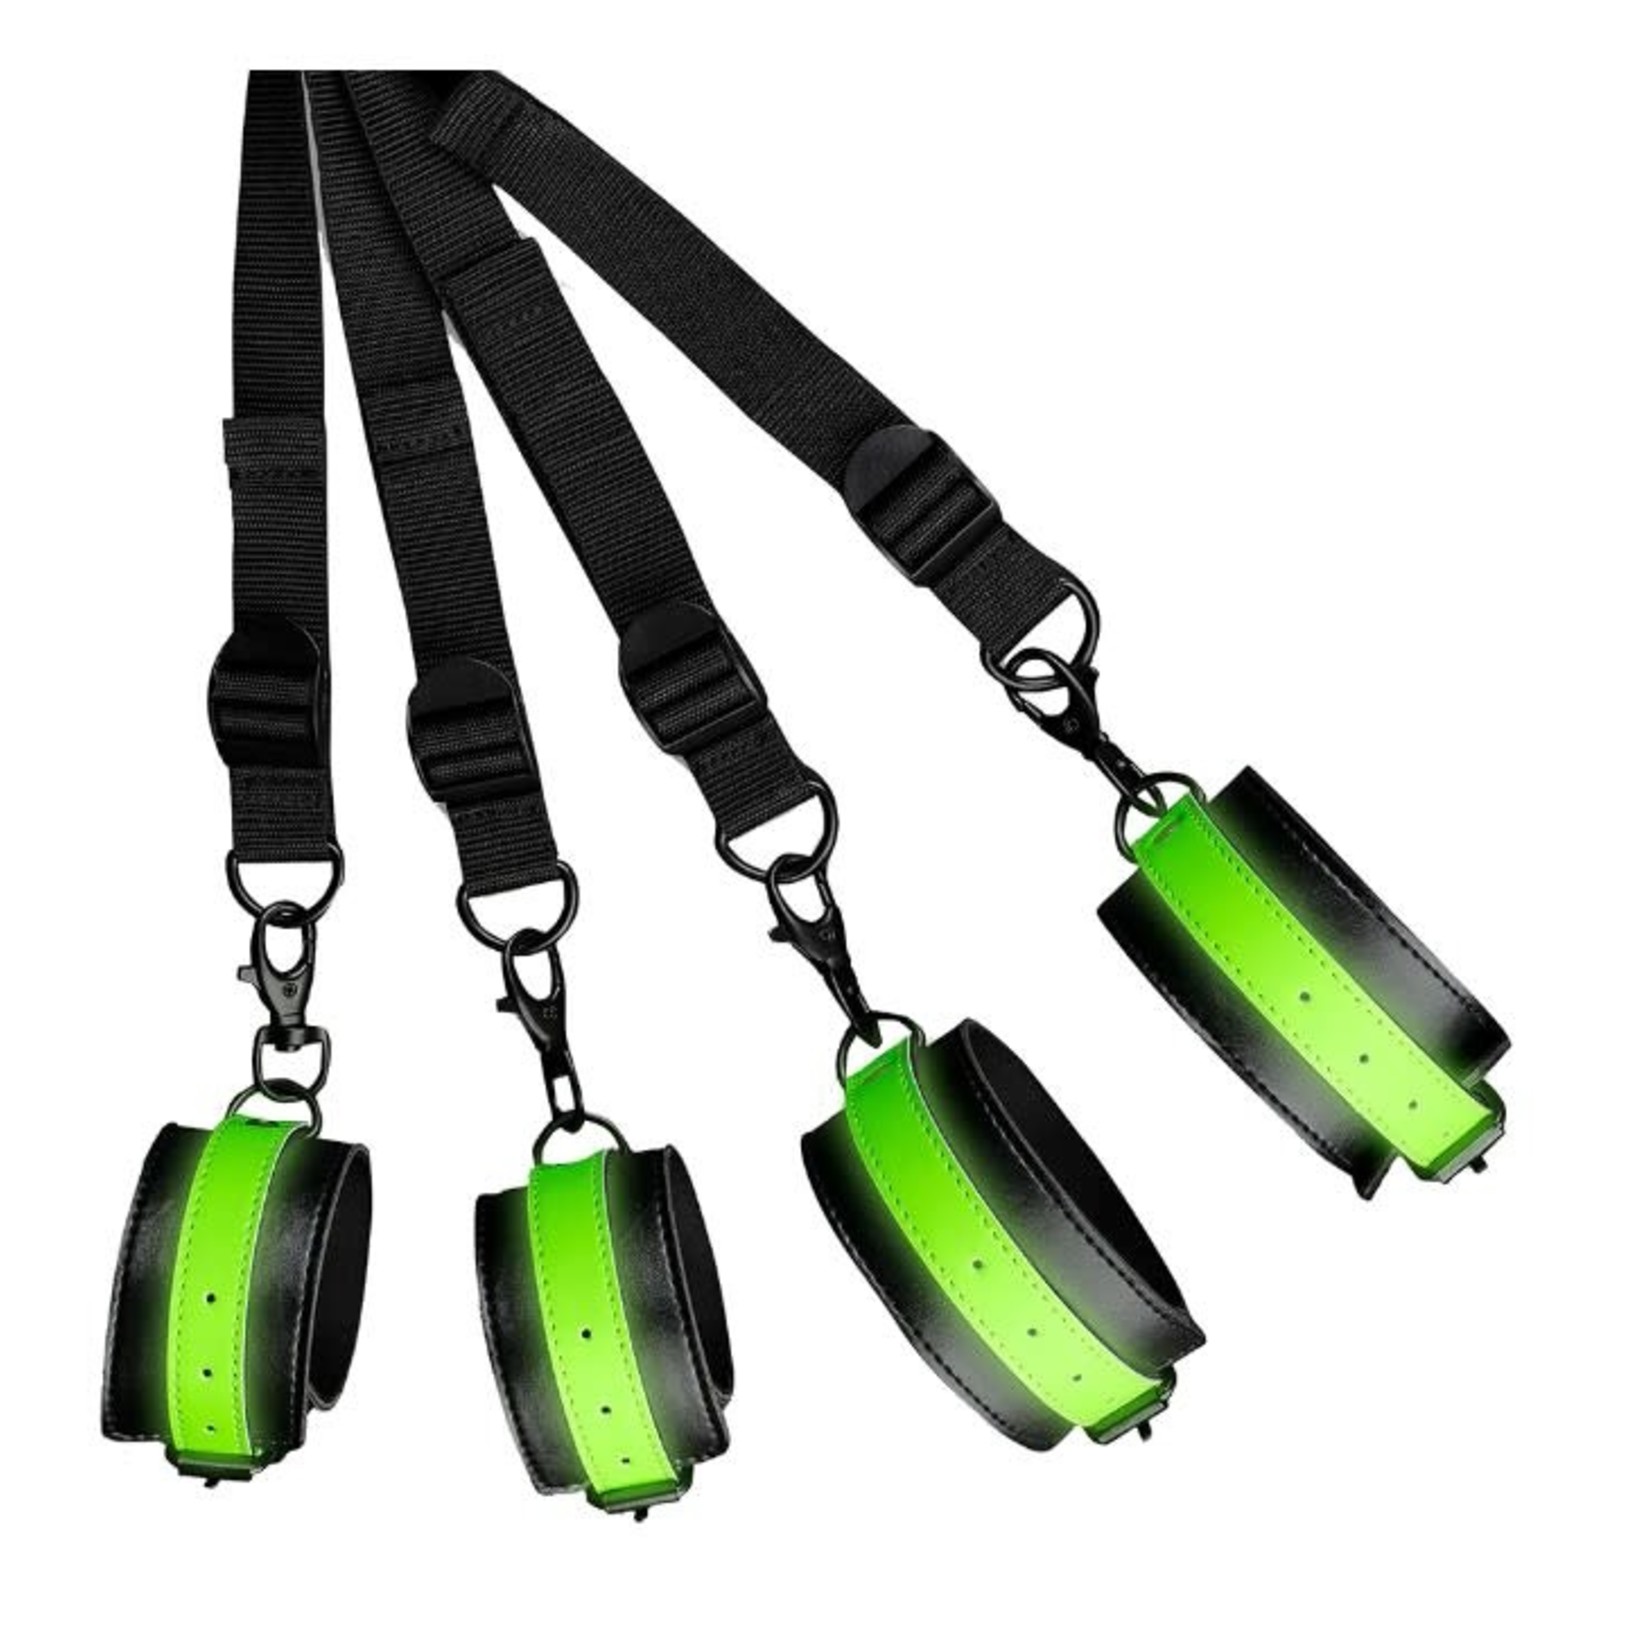 OUCH OUCH! GLOW IN THE DARK BED BINDINGS RESTRAINT KIT